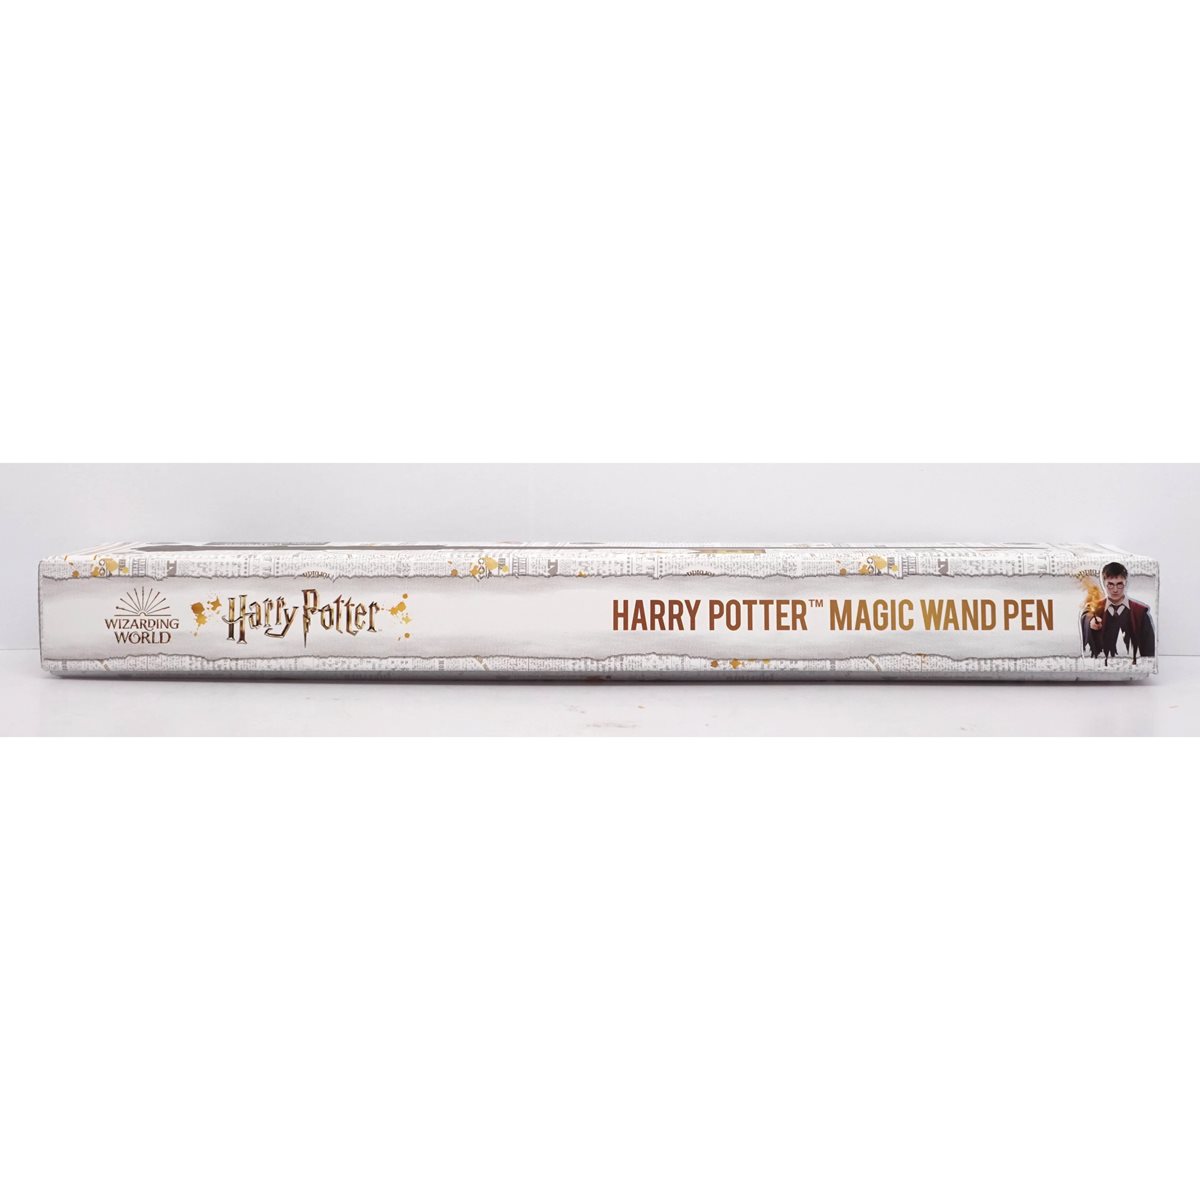 Harry Potter Wand Pen and Bookmark - Entertainment Earth